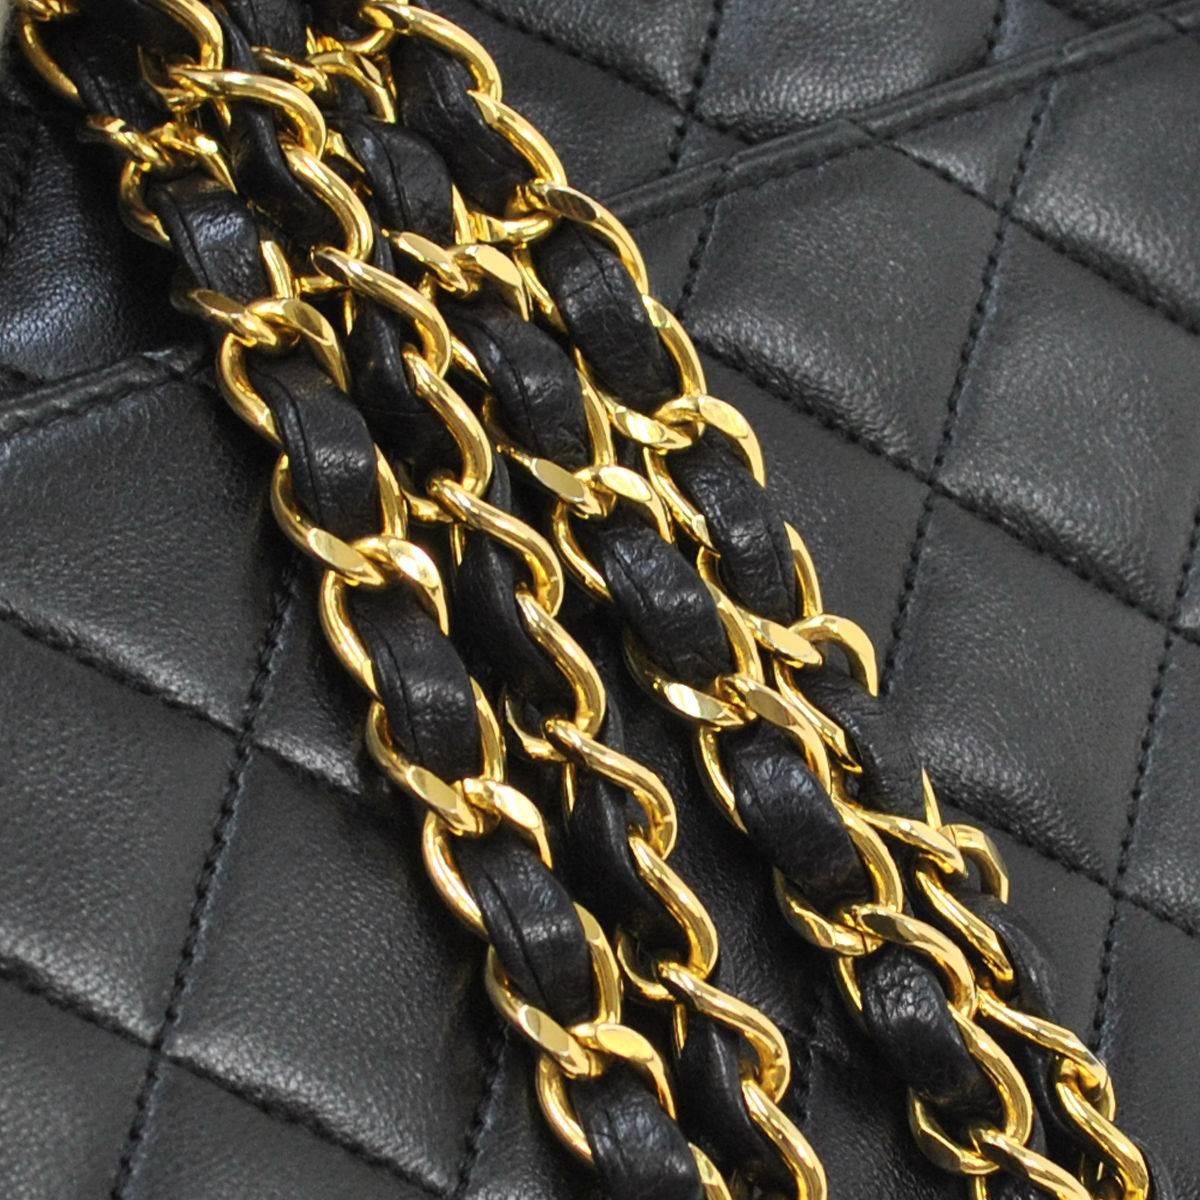 CURATOR'S NOTES

Chanel Vintage Lambskin Single Double Strap Evening Flap Shoulder Bag 

Lambskin
Gold tone hardware
Leather lining
Turnlock closure
Made in France
Date code 400148
Measures 9.5" W x 6.5" H x 2.5" D 
Double shoulder